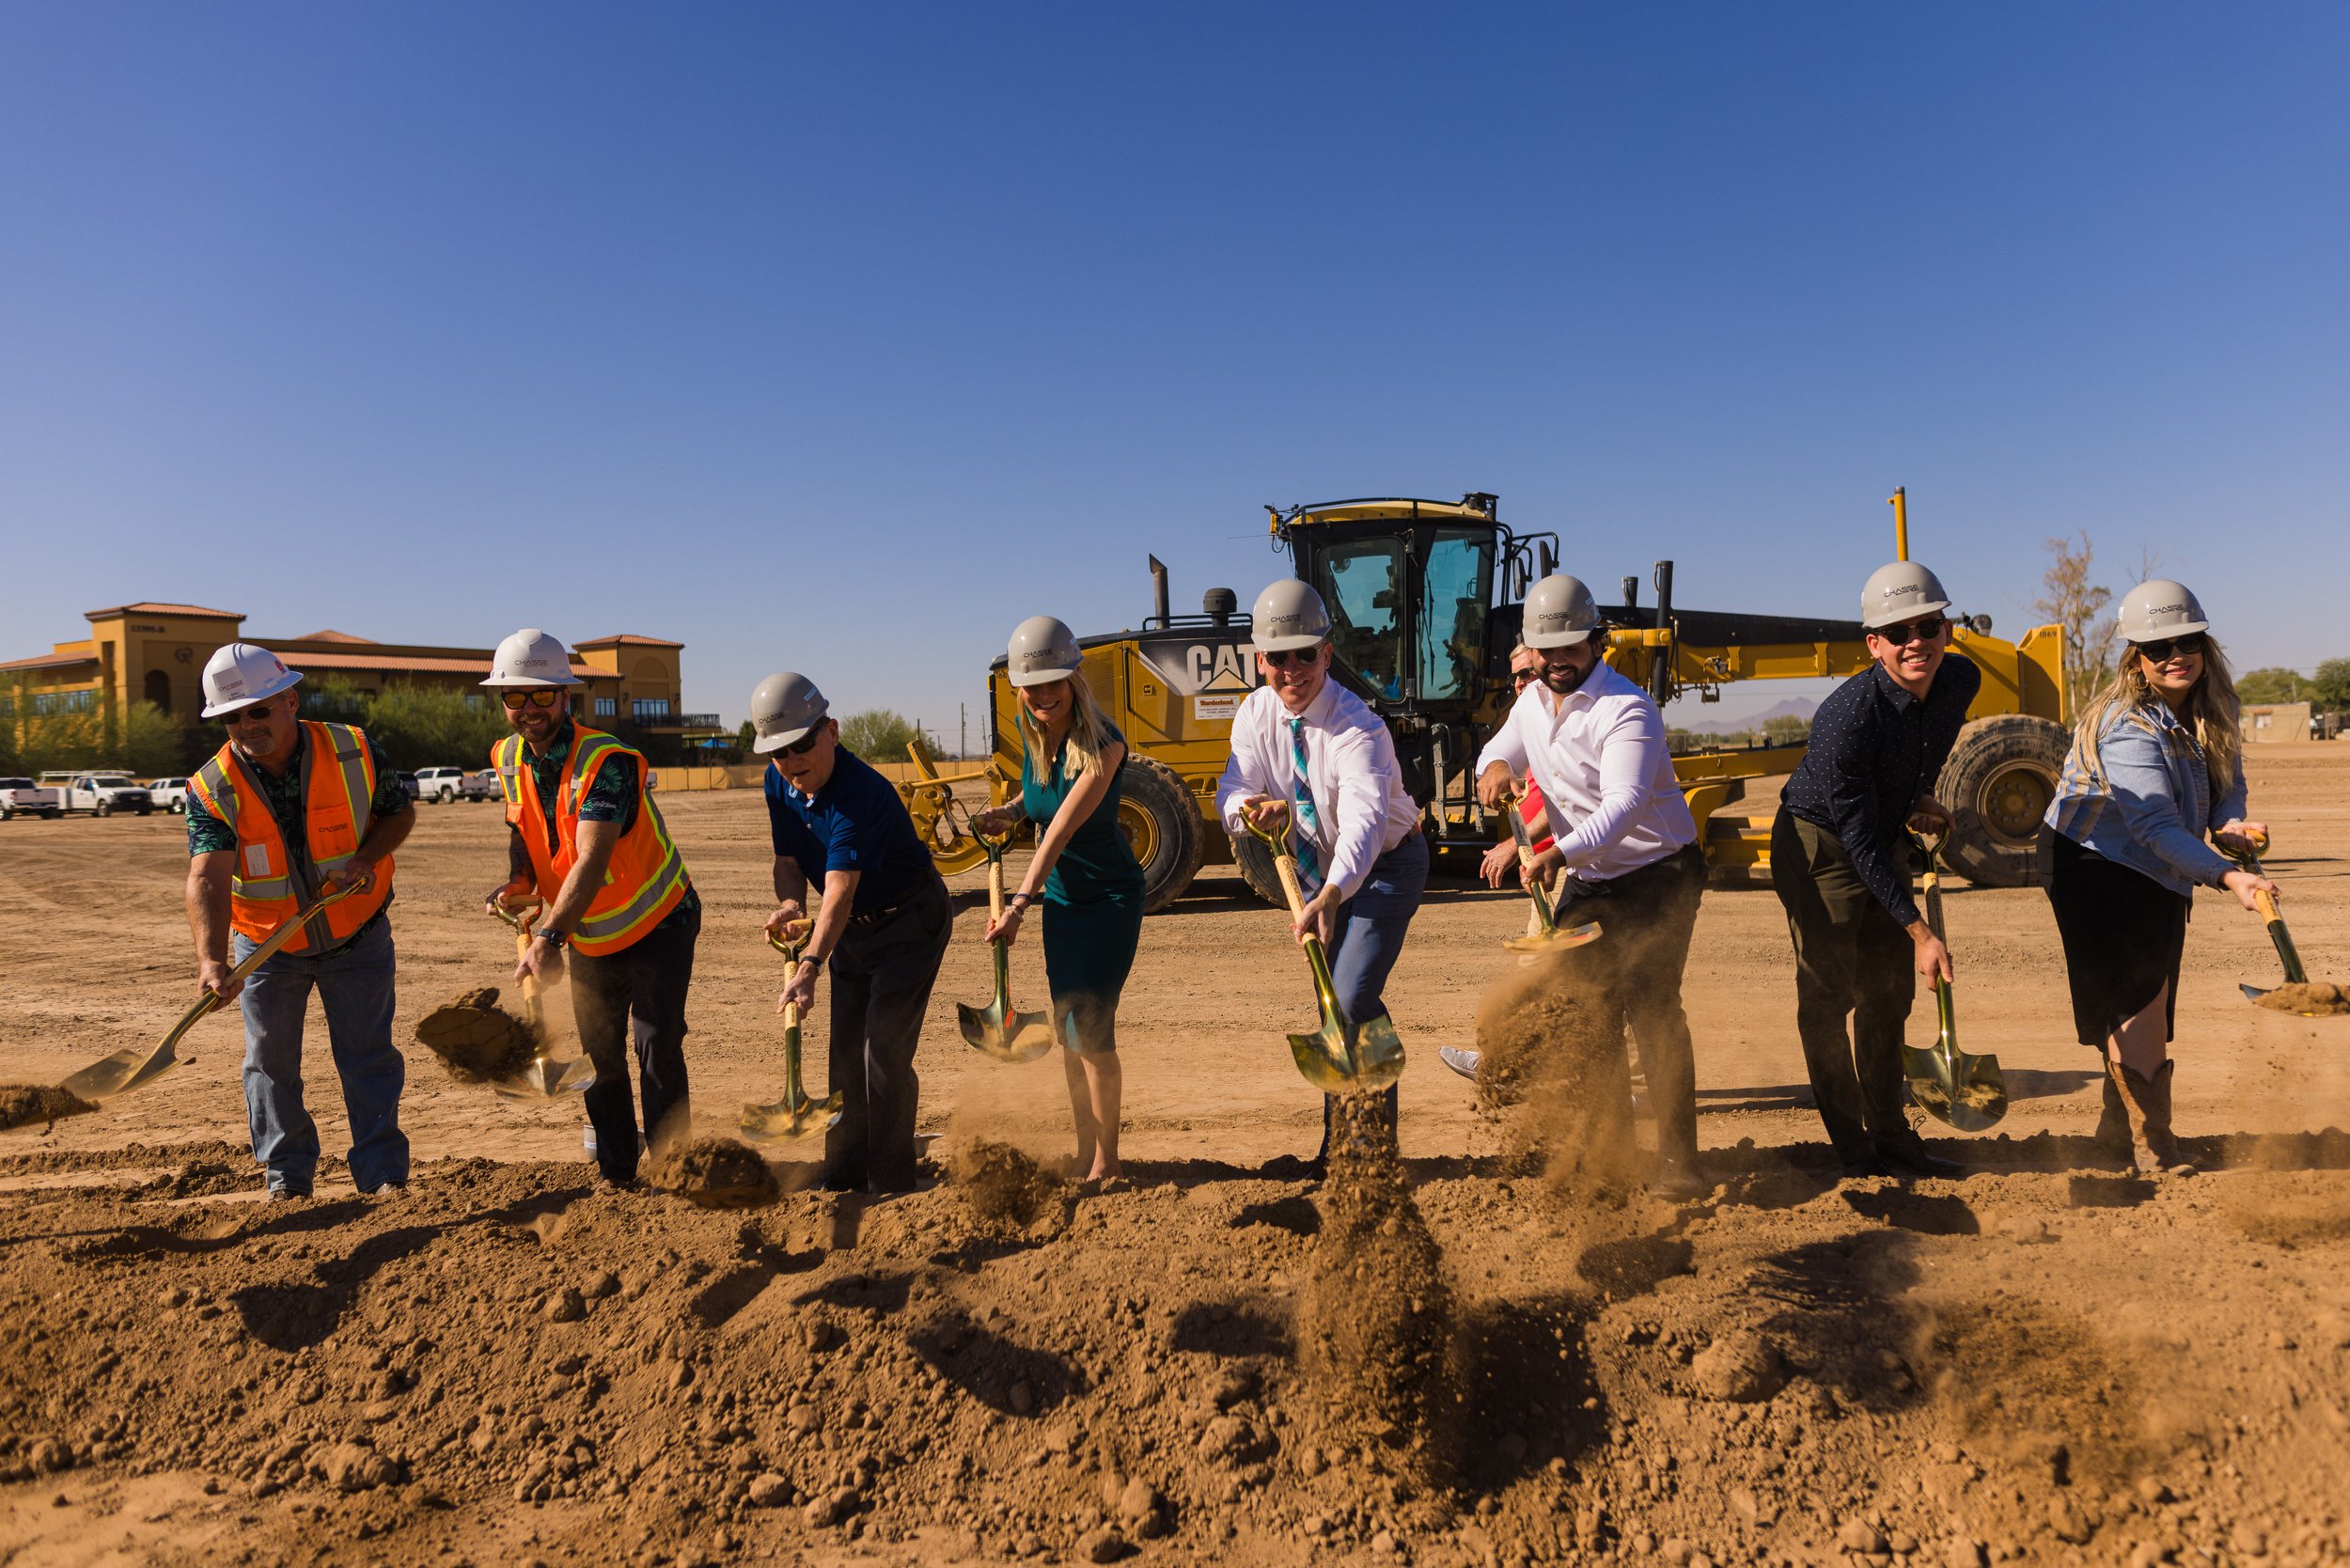  Shovel ceremony with representatives from Abacus Project Management, Architekton, and Chasse Building Team 